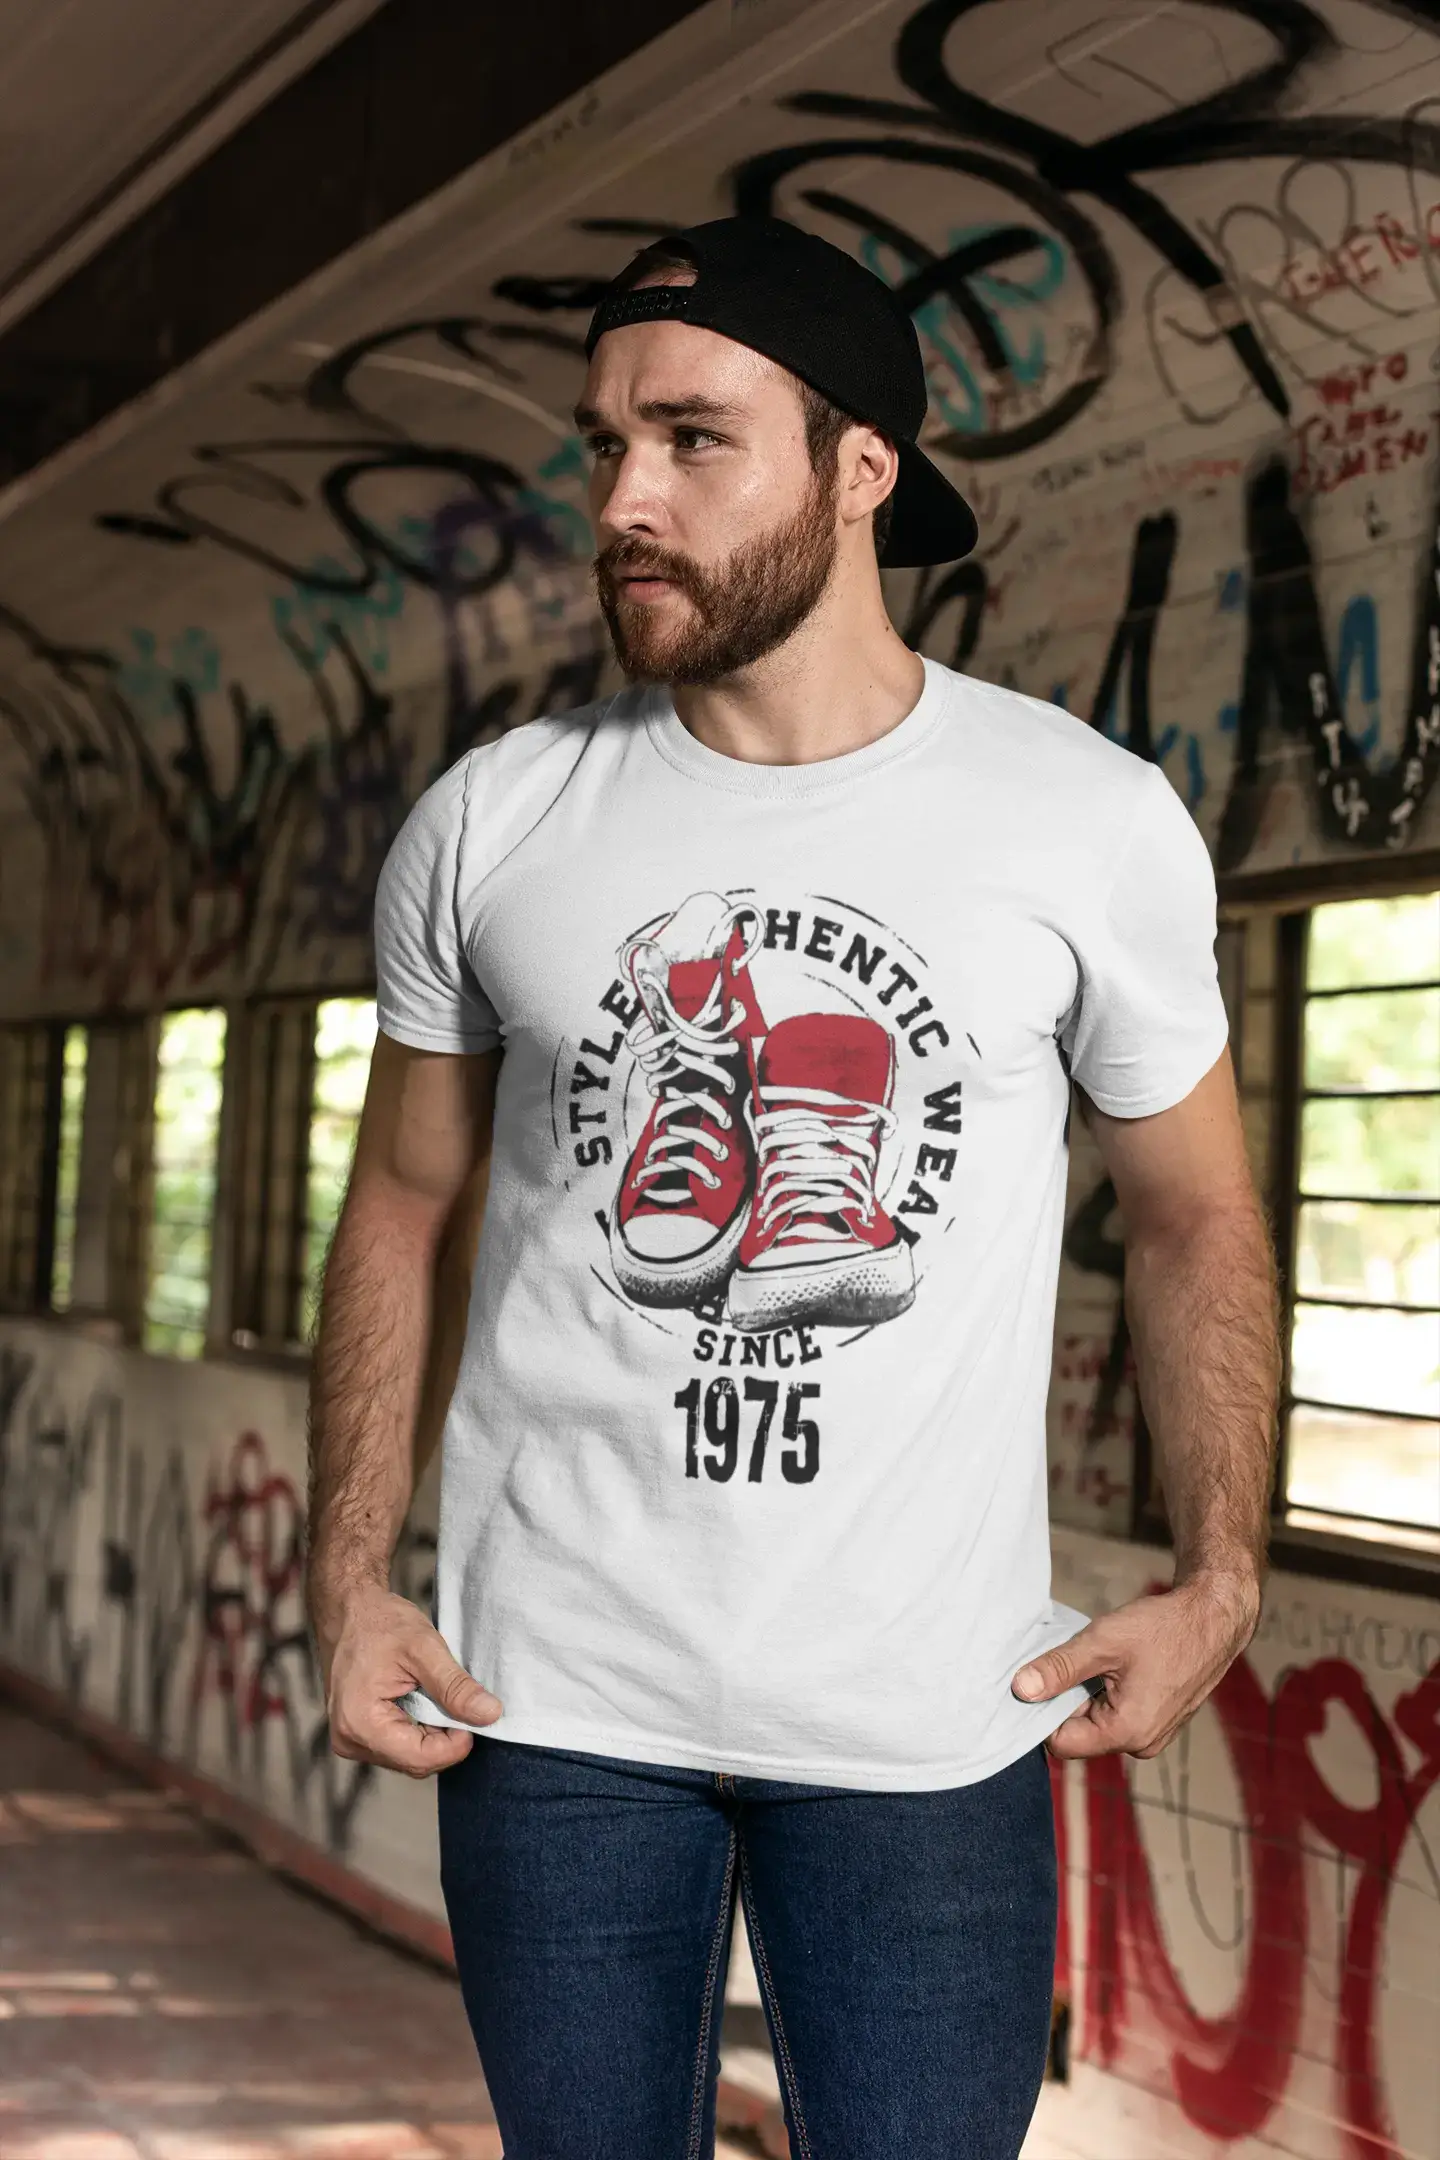 Men's Vintage Tee Shirt Graphic T shirt Authentic Style Since 1975 White